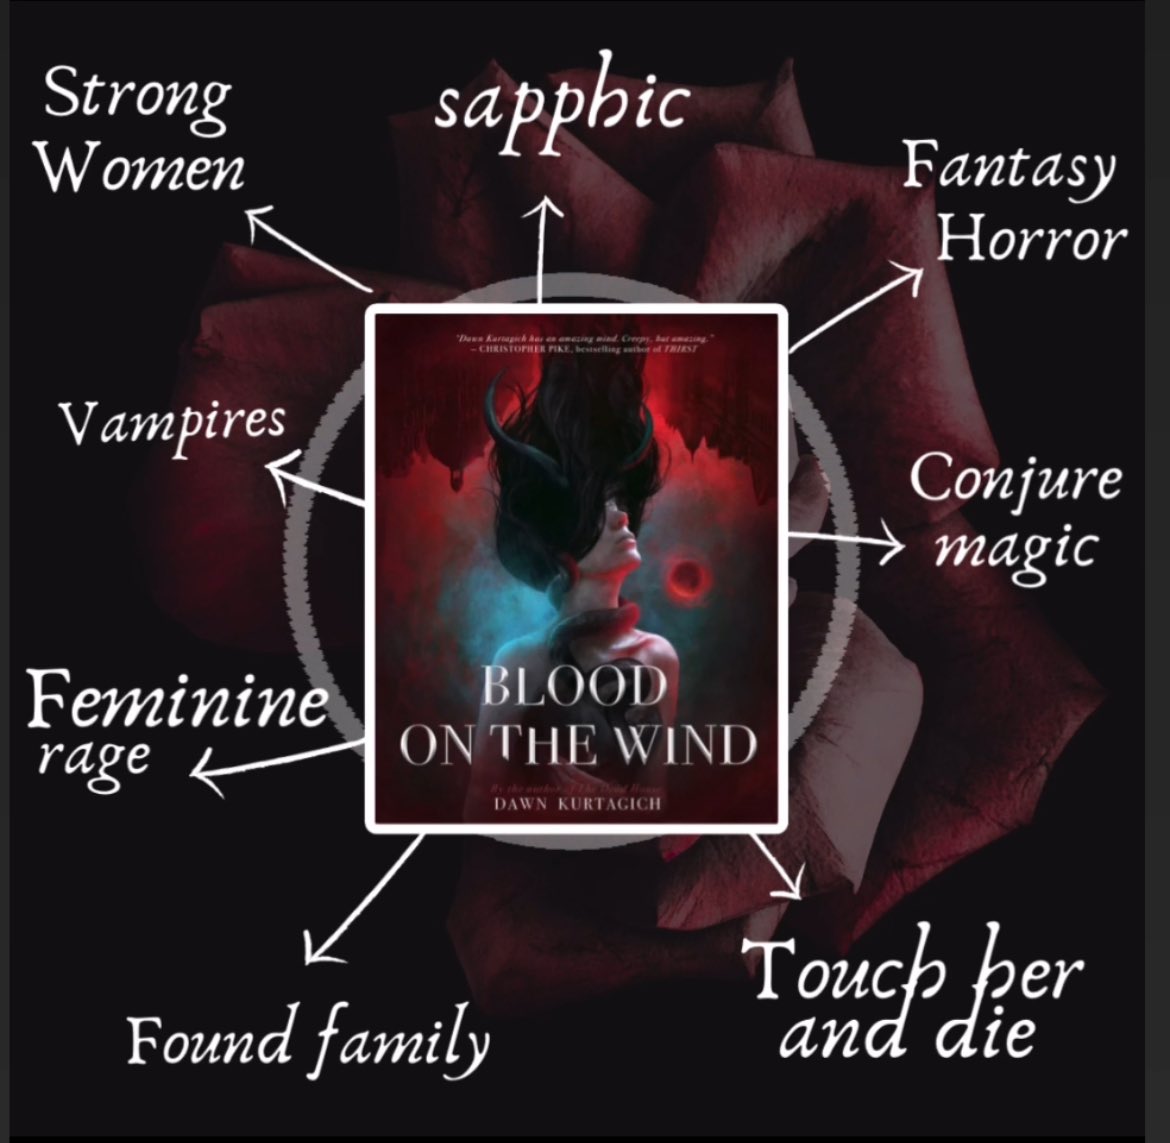 Almost forgot to mention here that it’s BLOOD ON THE WIND’S birthday! 🖤 ❤️ sapphic kisses ❤️ bloodthirsty vampires ❤️ touch her and die vibes (wlw) ❤️ creepy convent Happy birthday, little book!